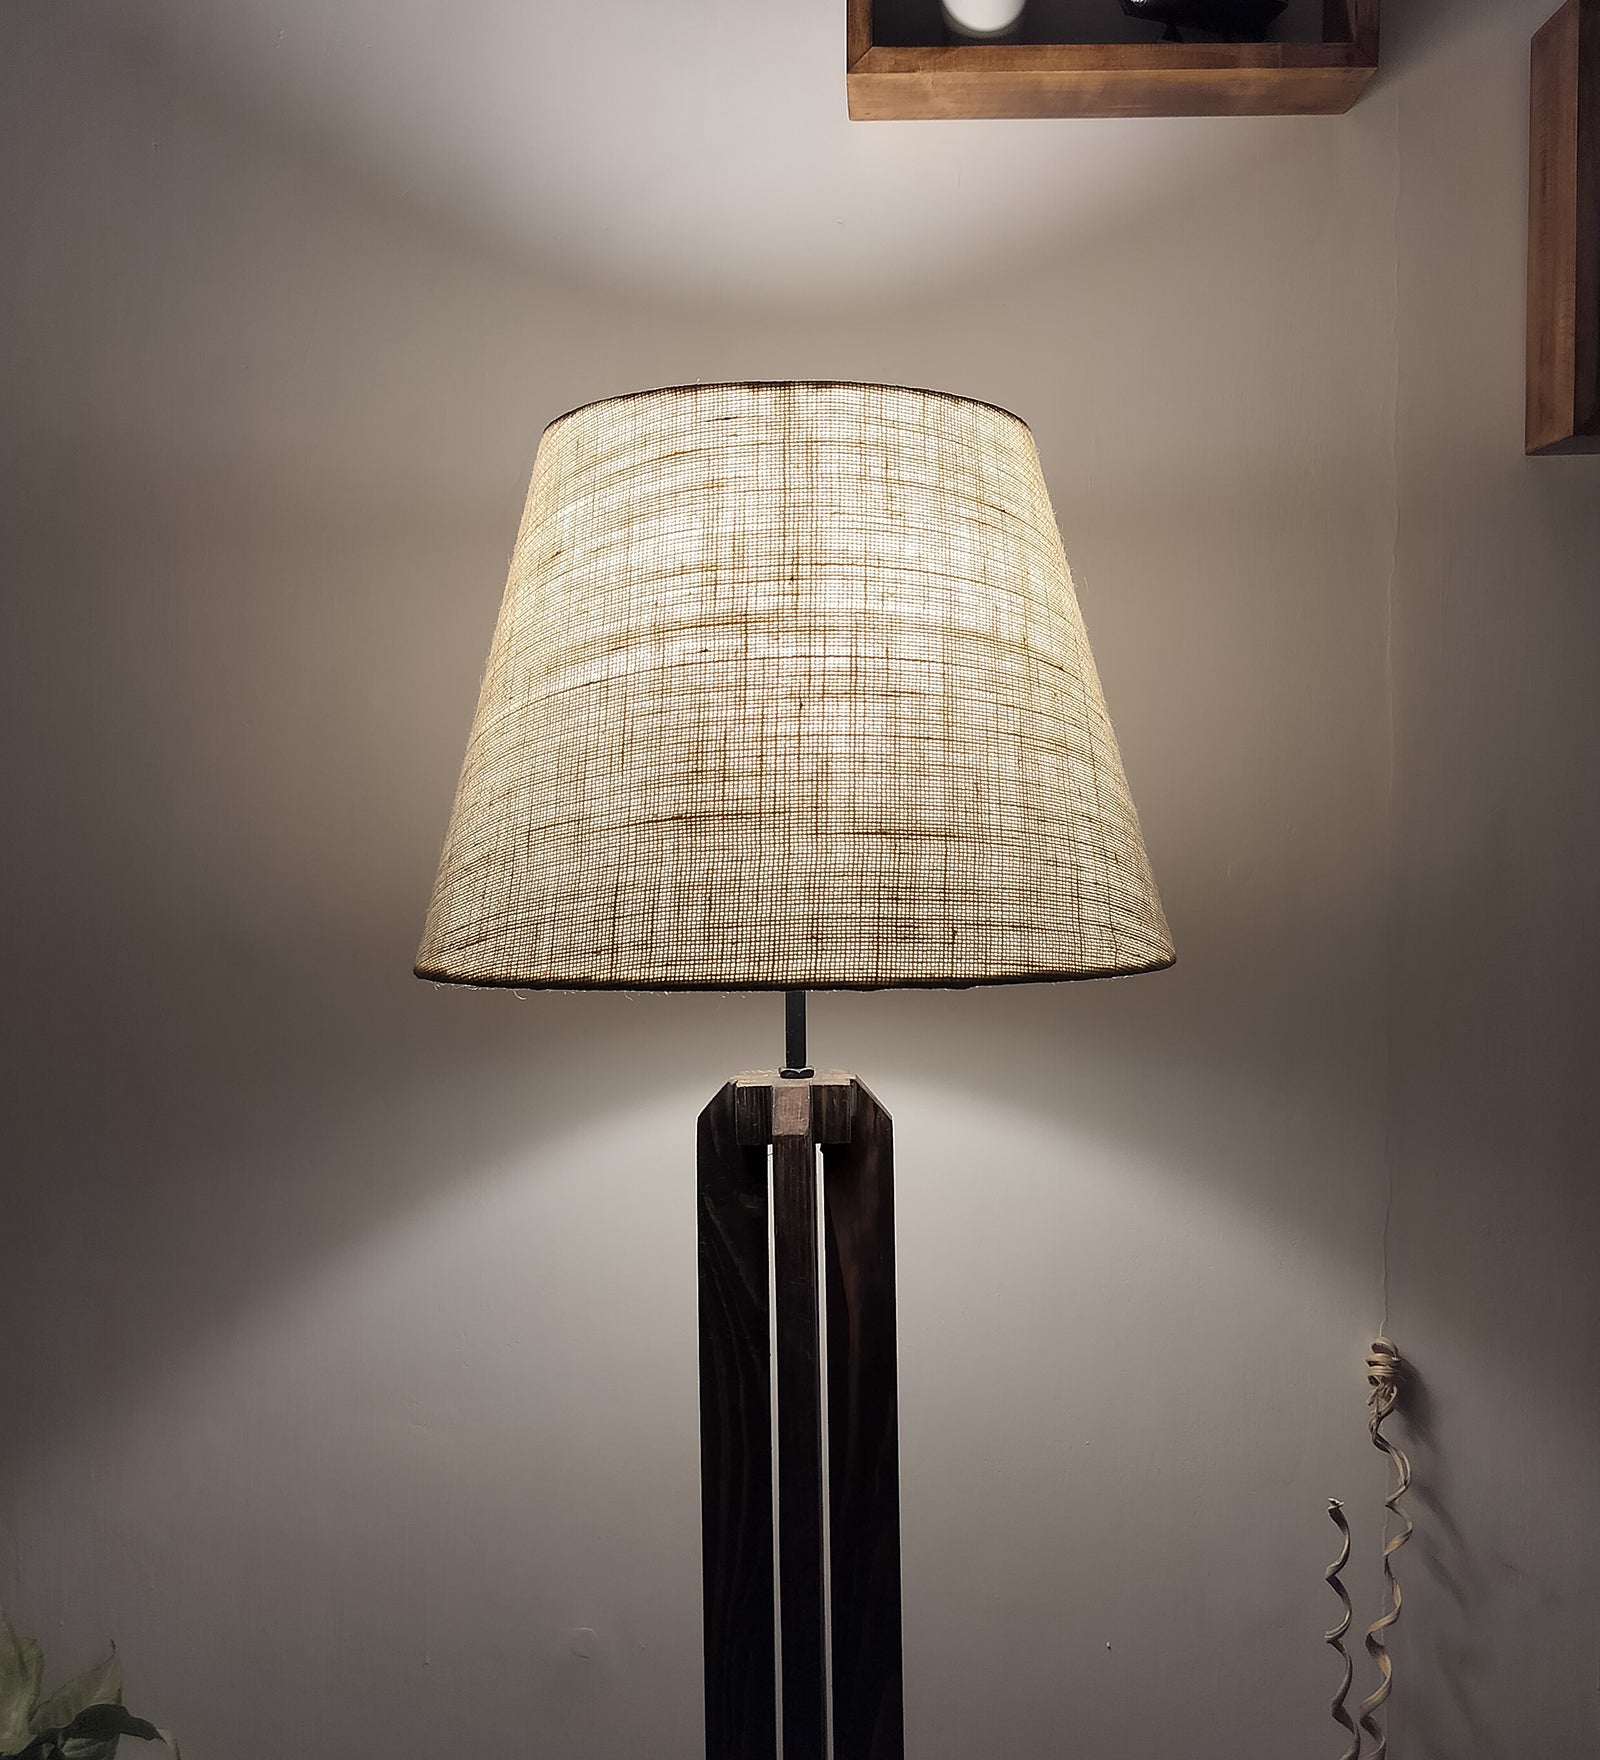 Stella Wooden Floor Lamp with Premium Beige Fabric Lampshade (BULB NOT INCLUDED)